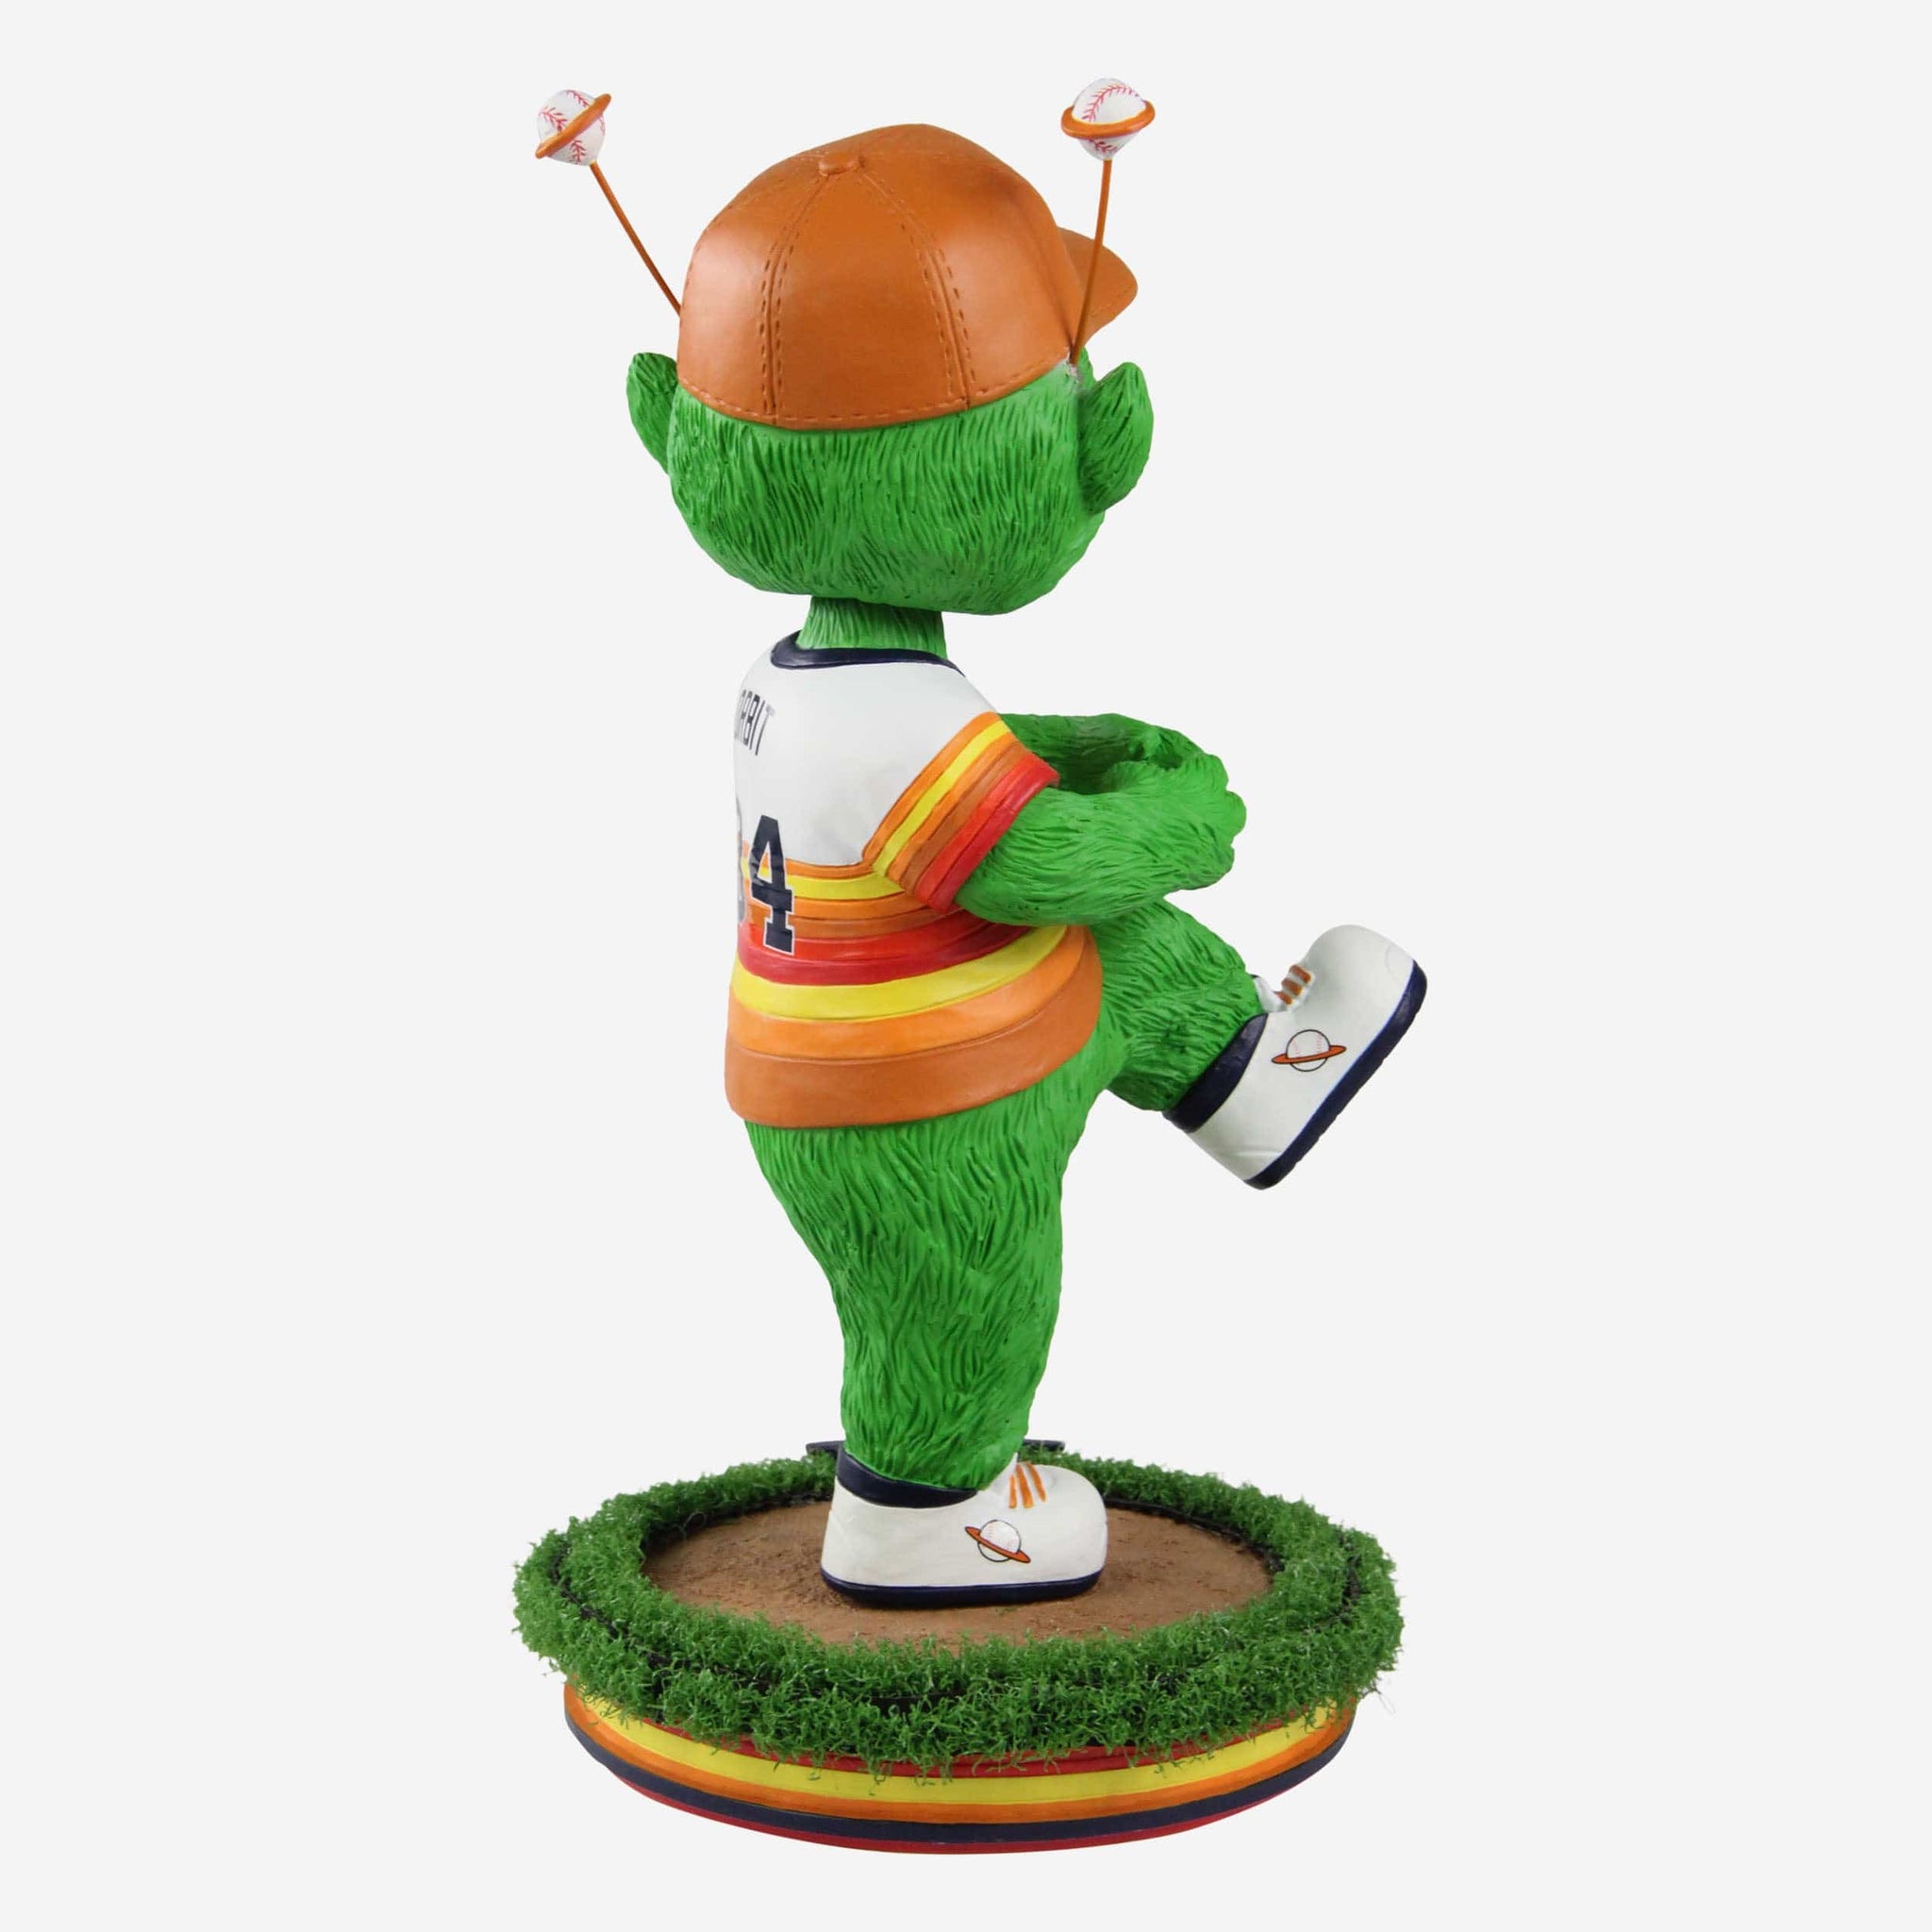 Orbit Houston Astros 2023 City Connect Field Stripe Mascot Bighead Bobblehead Officially Licensed by MLB